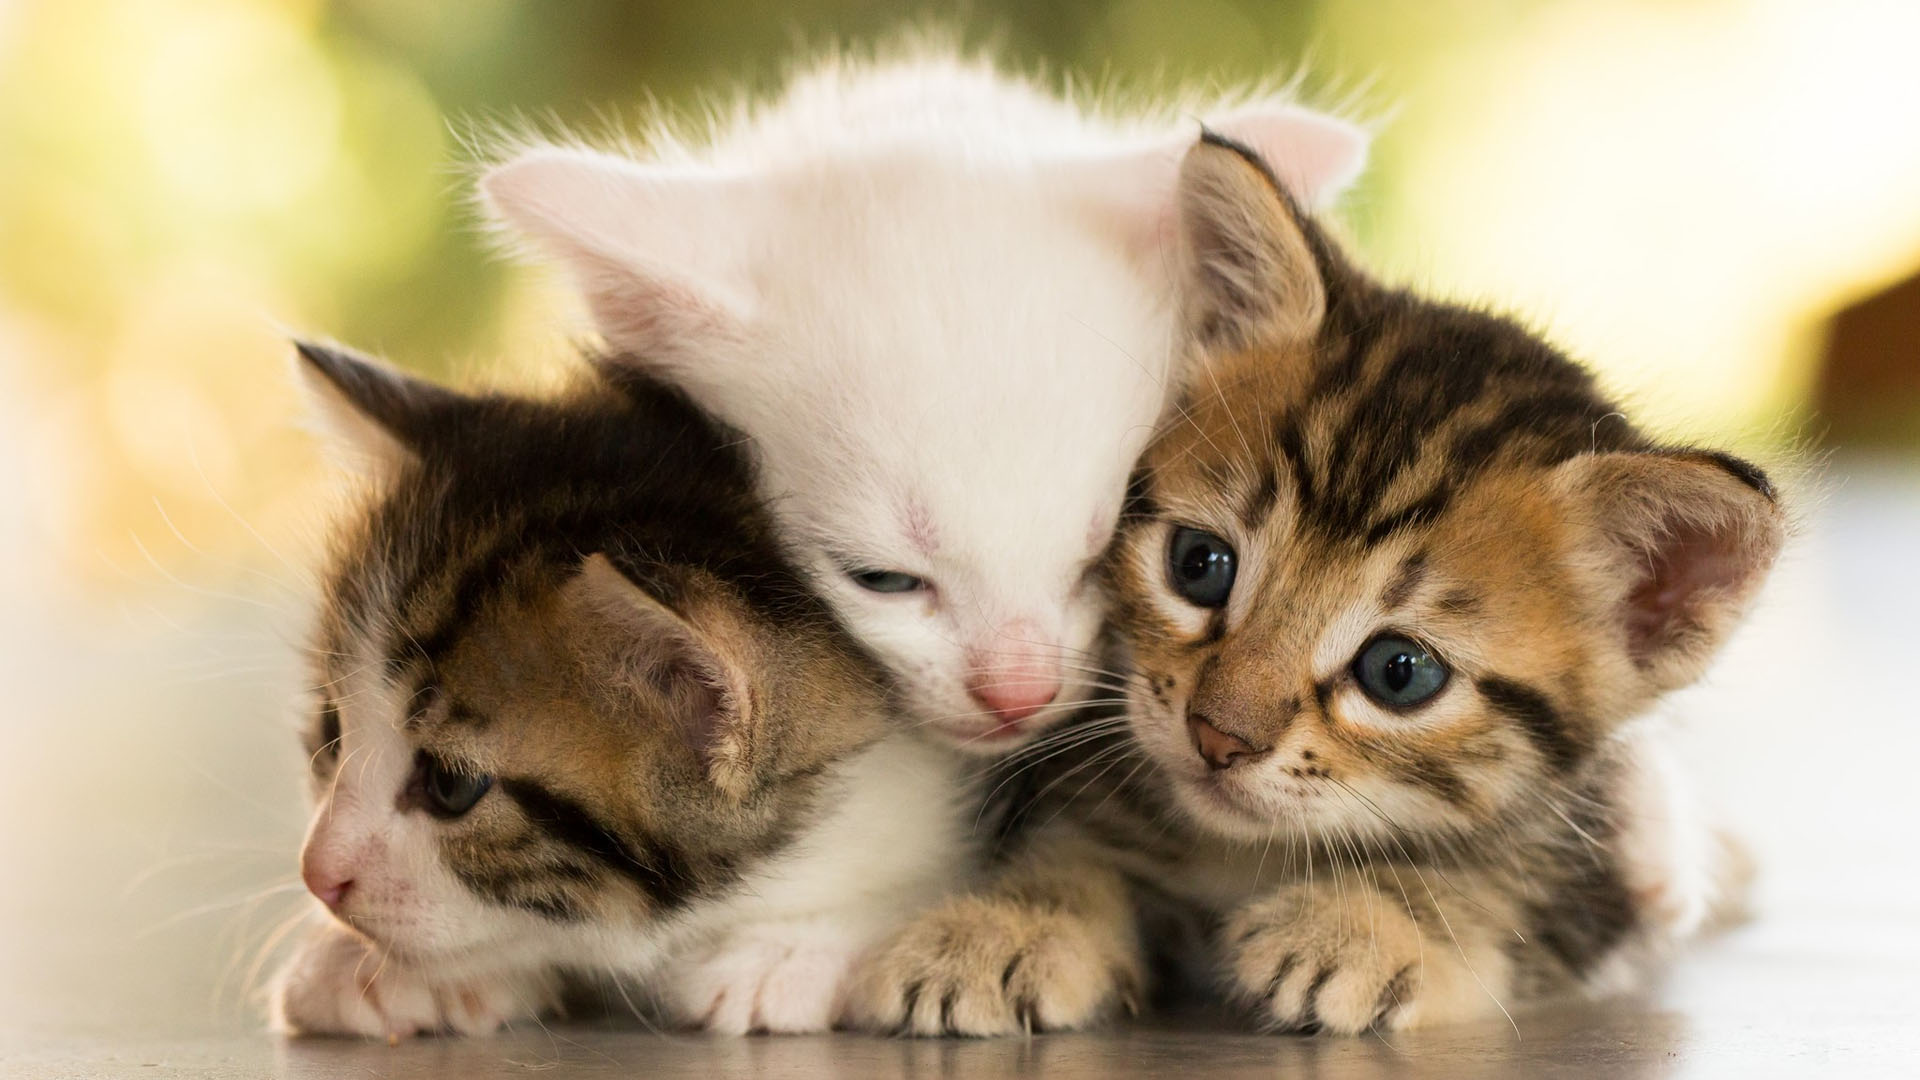 Cute Baby Cats Wallpaper - Cute Small Cat Couple Images Hd - 1920x1080  Wallpaper 